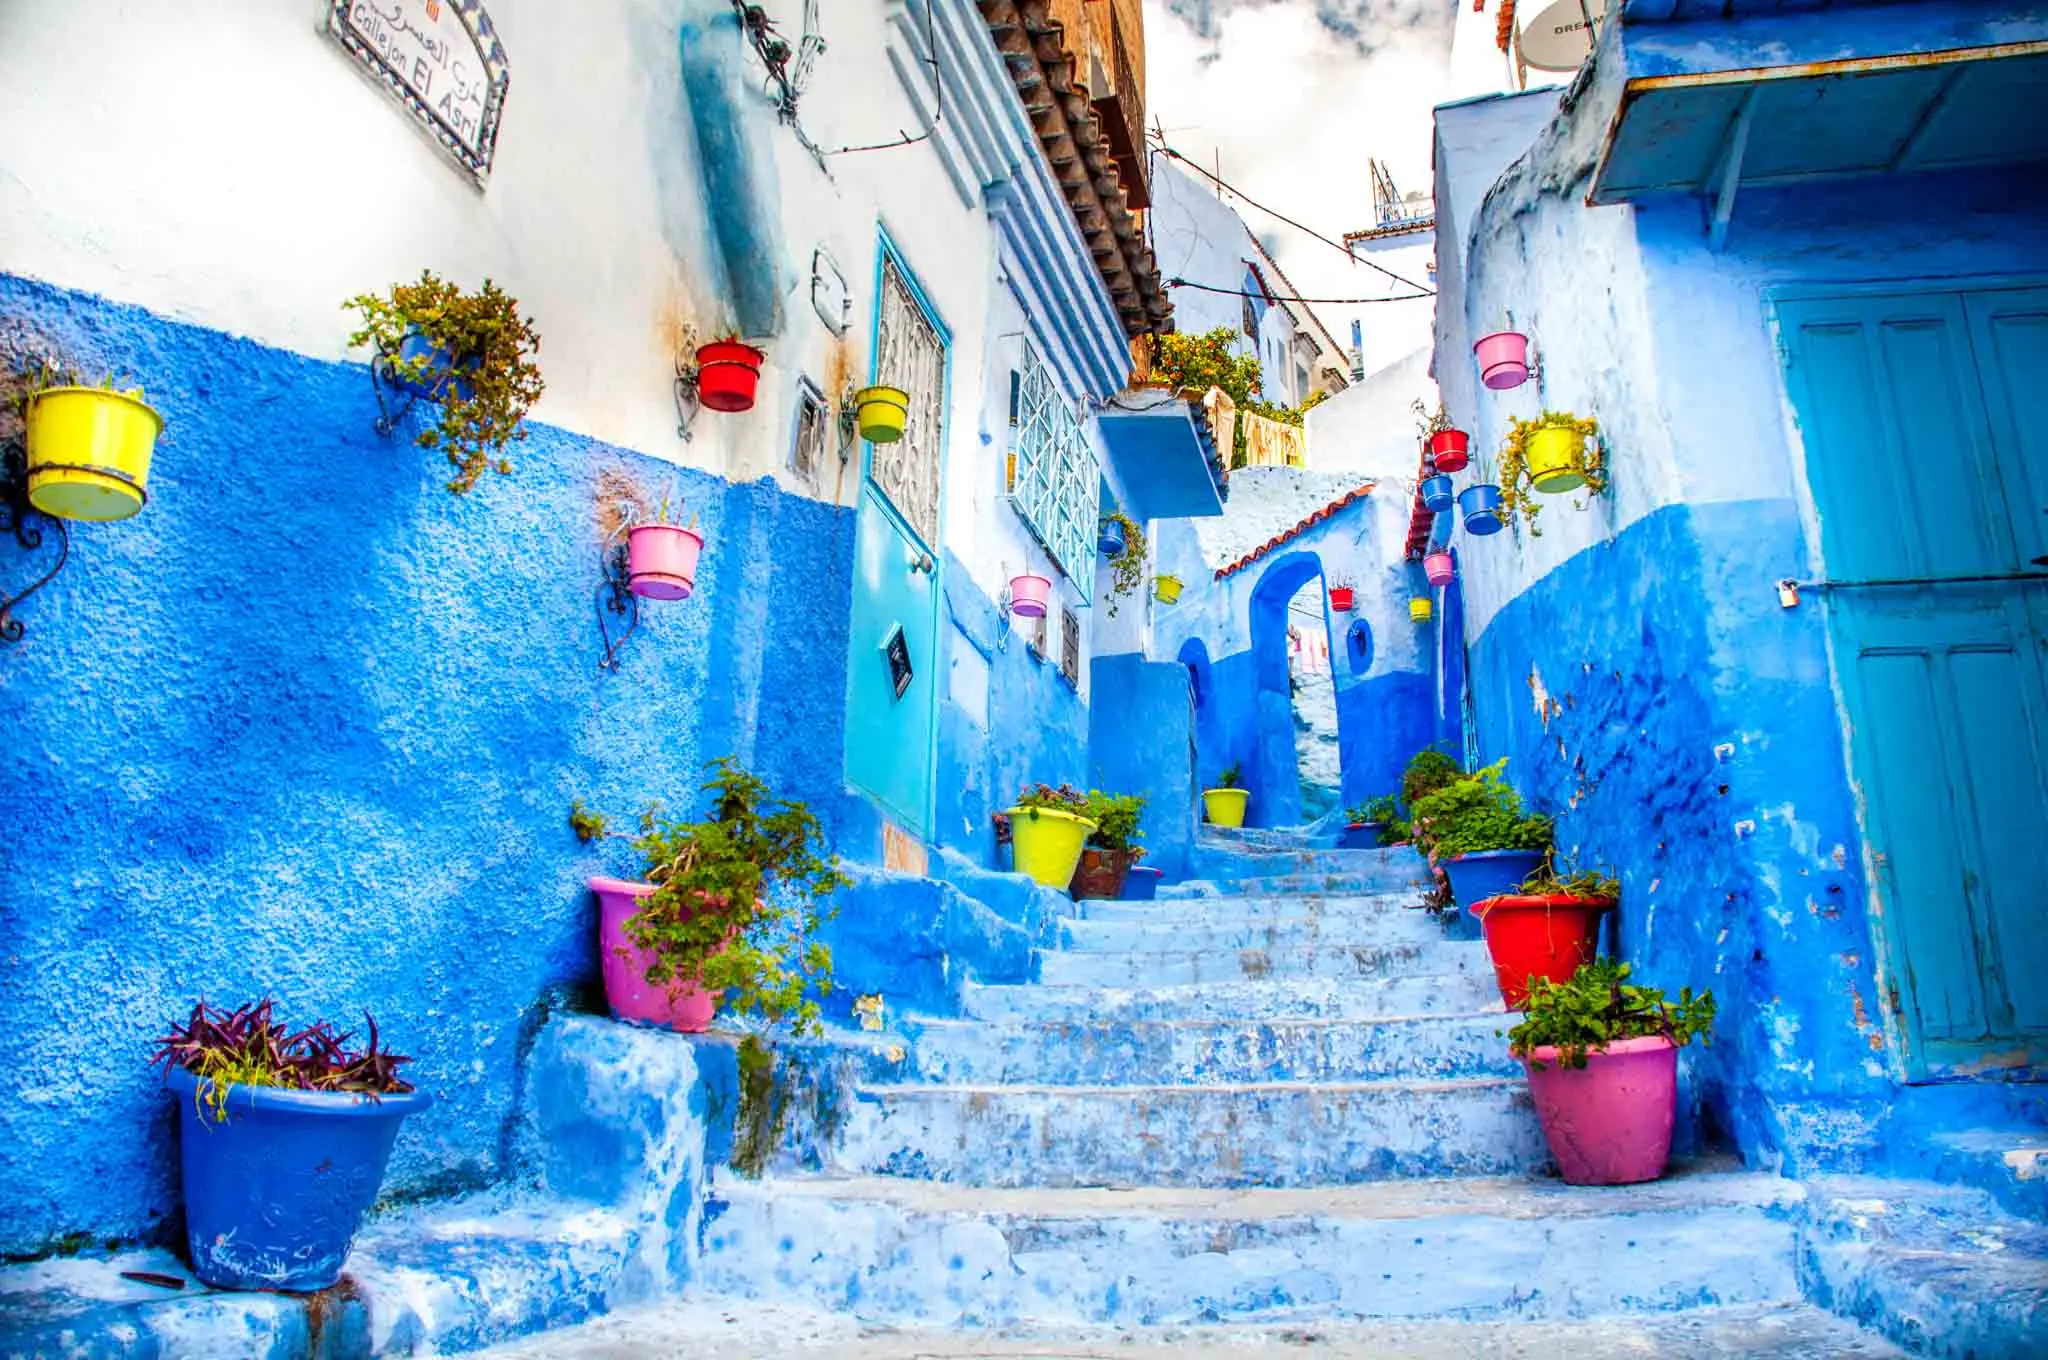 Blue staircase lined with colorful pots in Chefchaouen Morocco